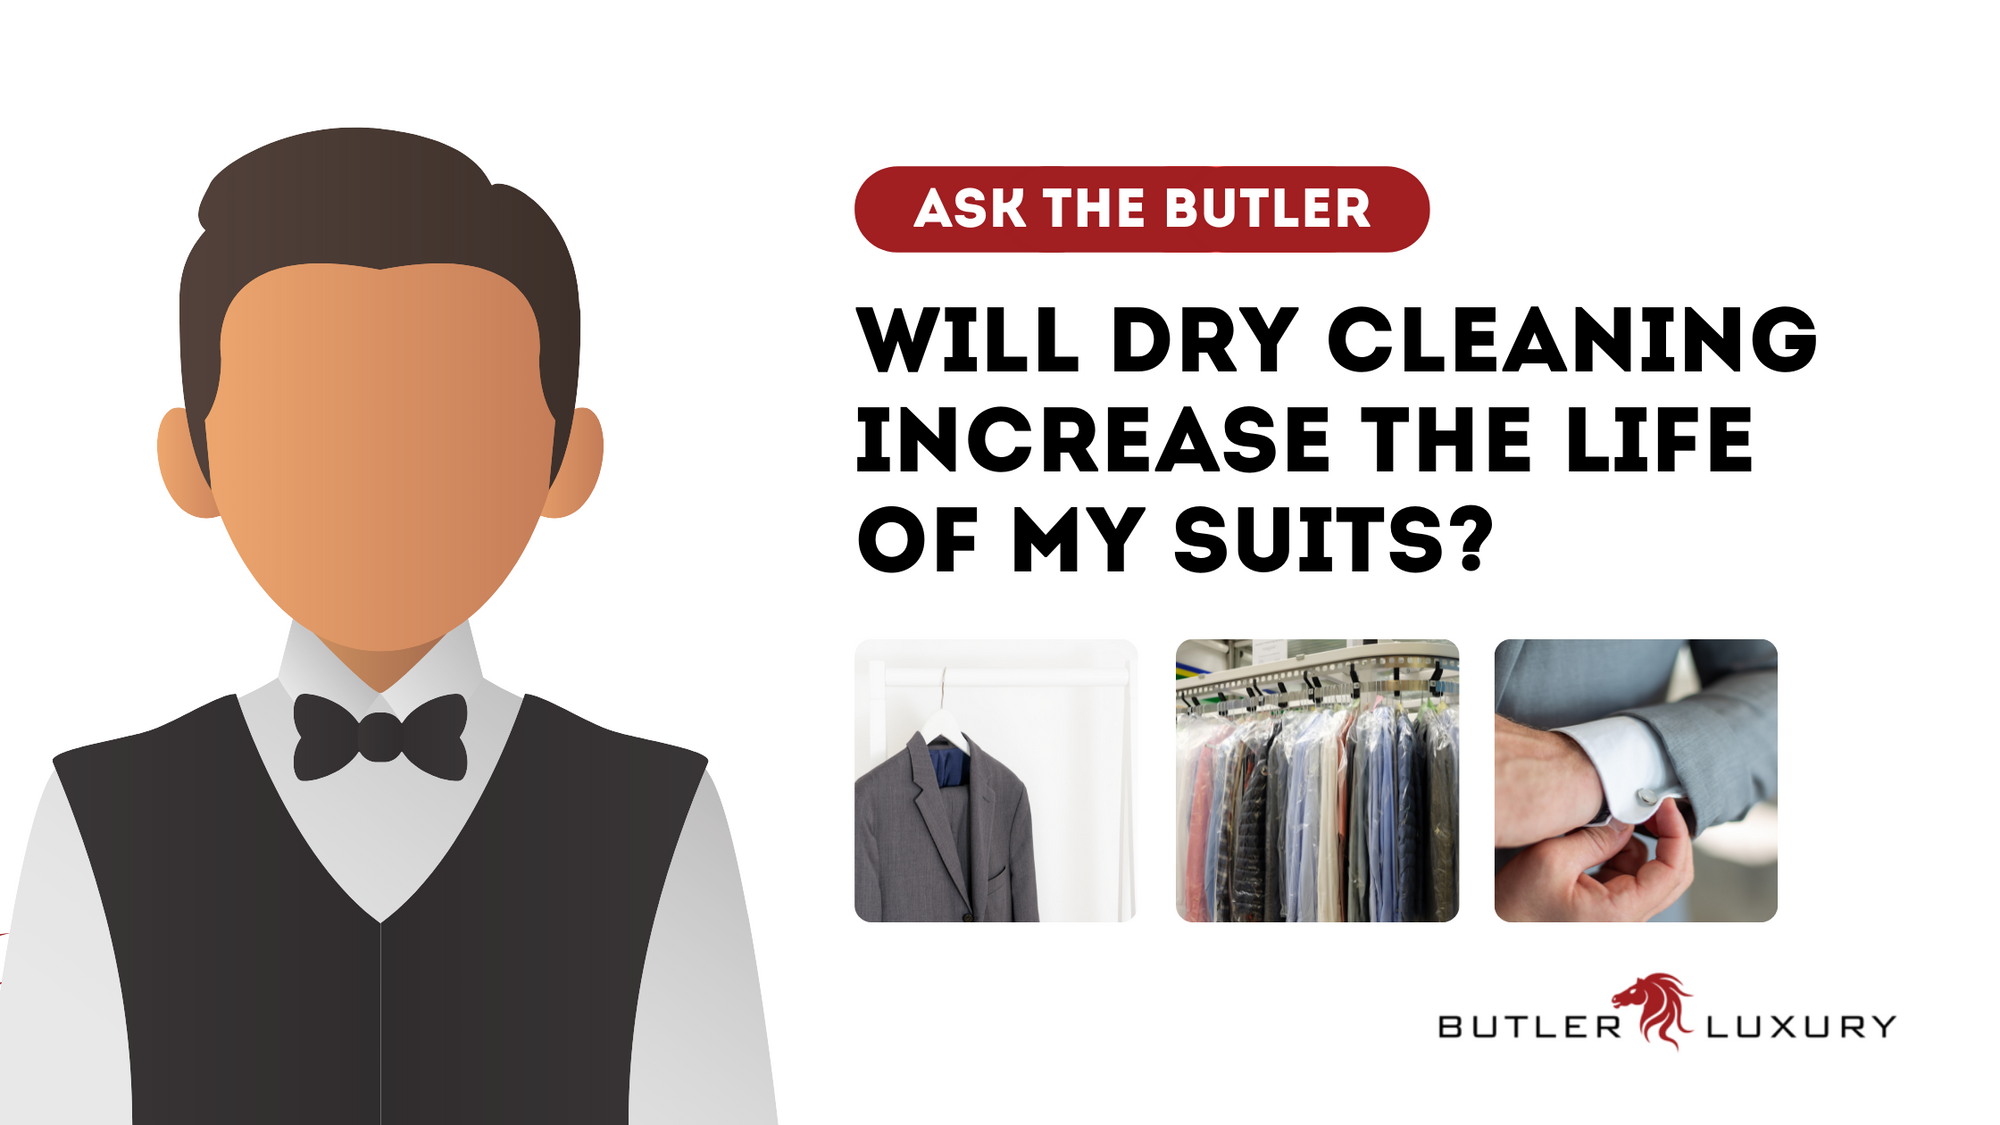 Ask the Butler: Will Dry Cleaning Increase the Life of My Suits?